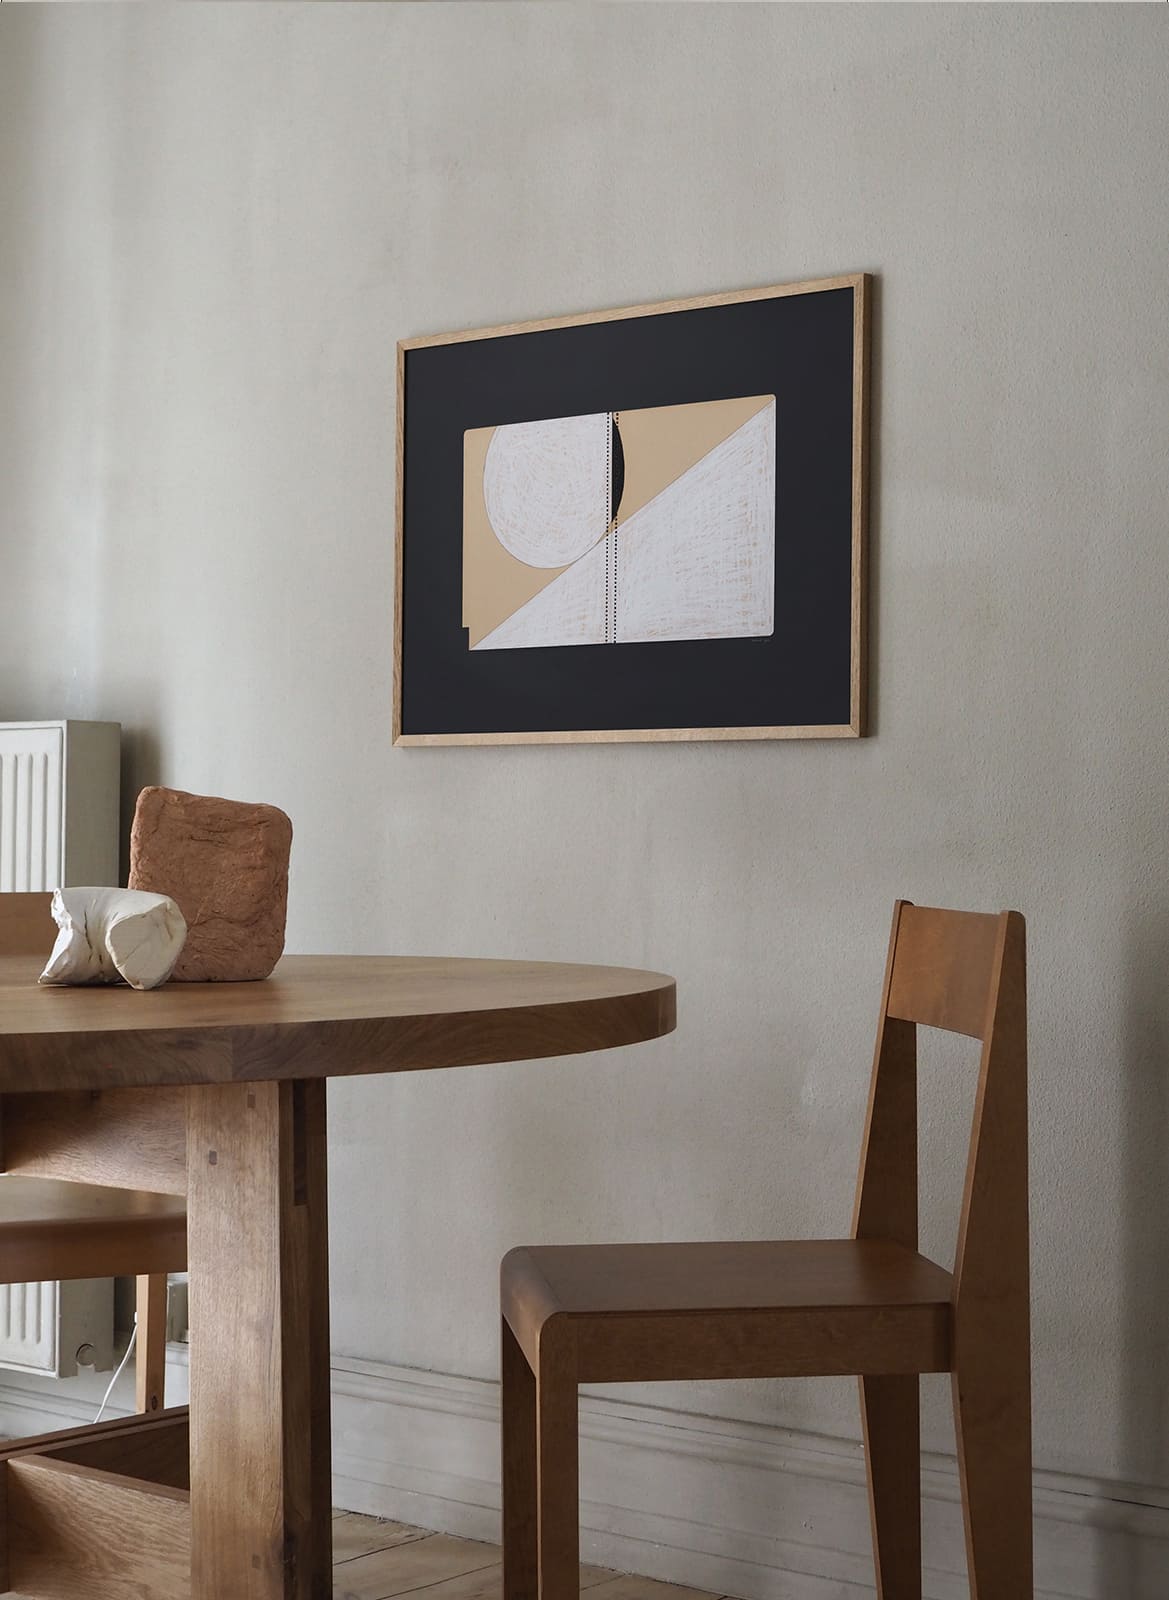   Framed minimalistic posters hanging above a table by Atelier Cph